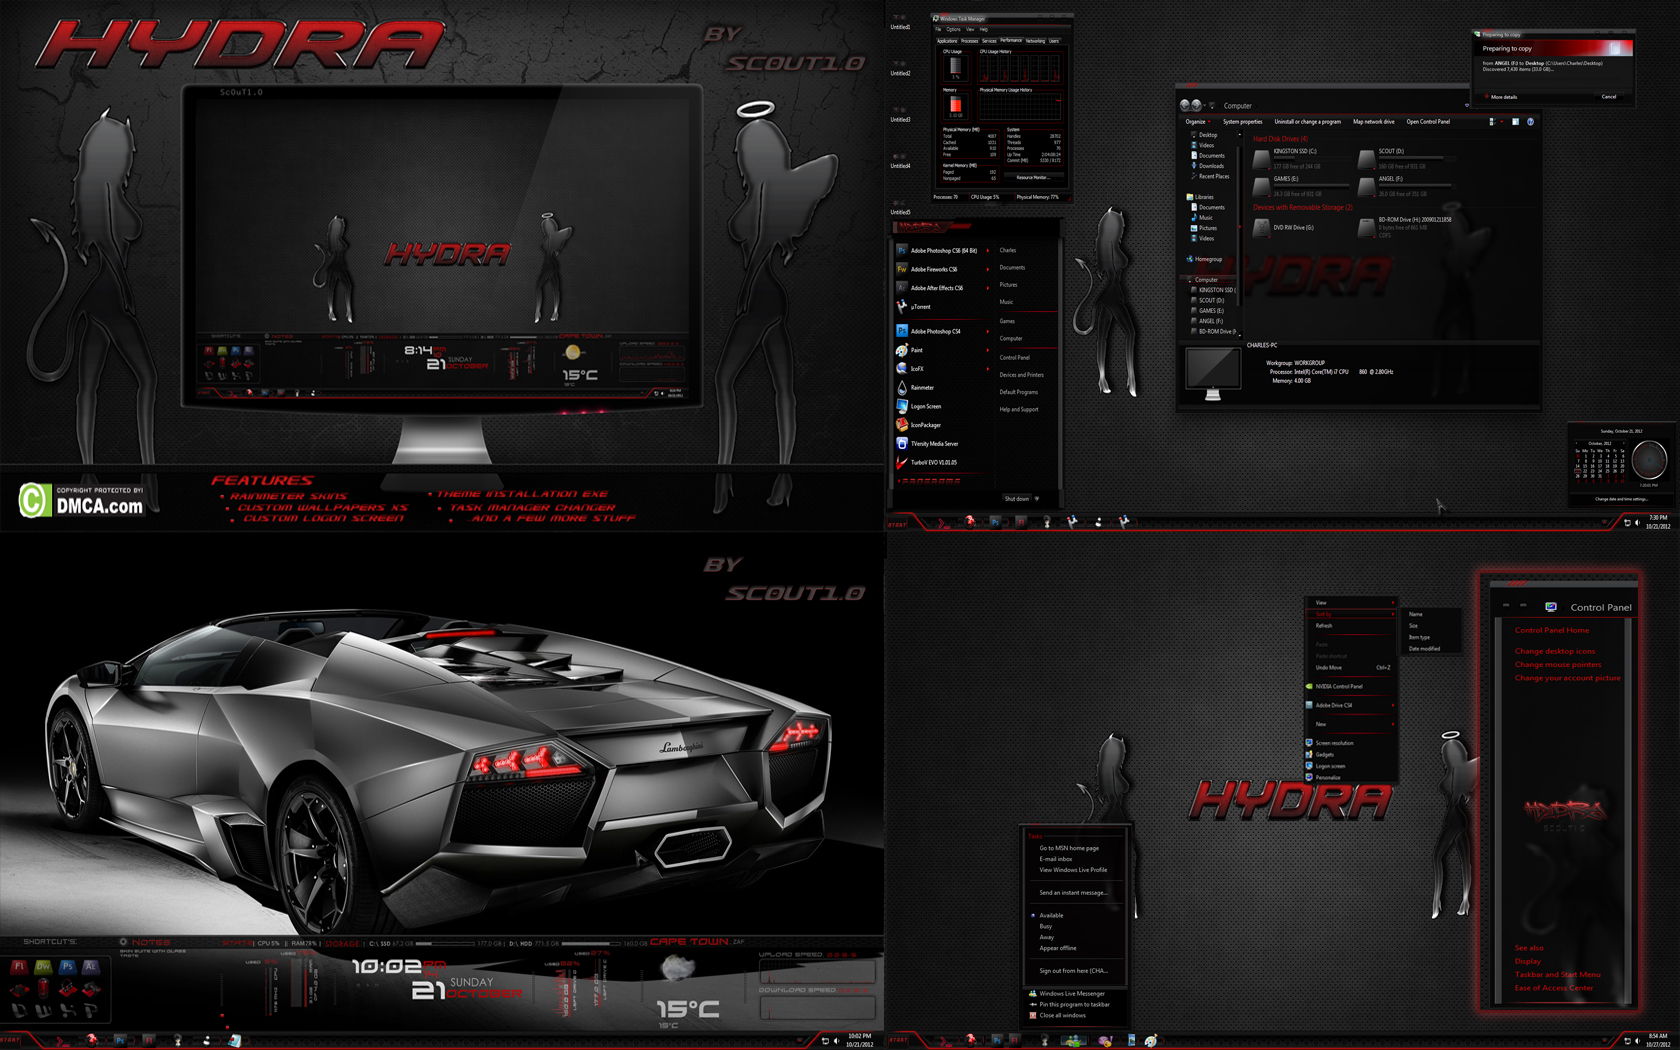 Download Audi Themes For Windows 7